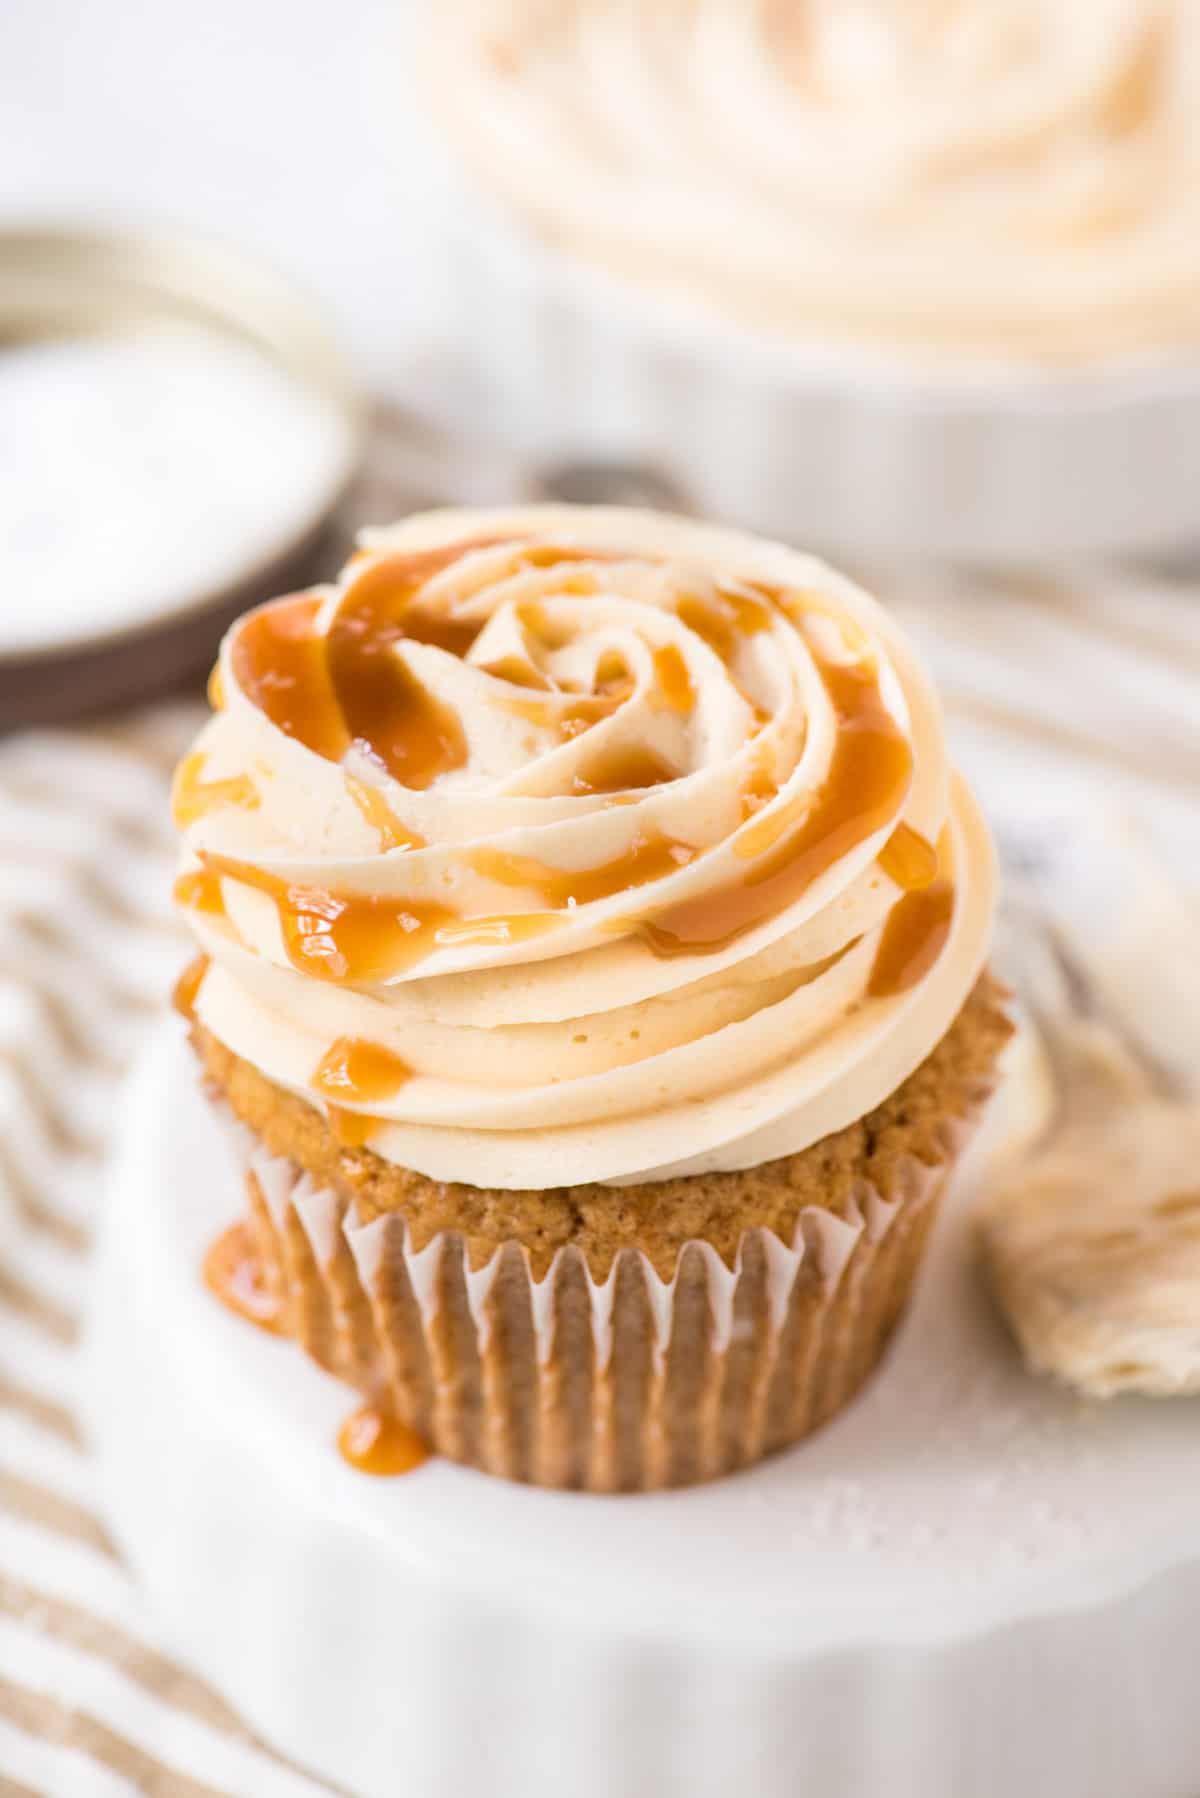 salted caramel frosting piped on cupcake on white background